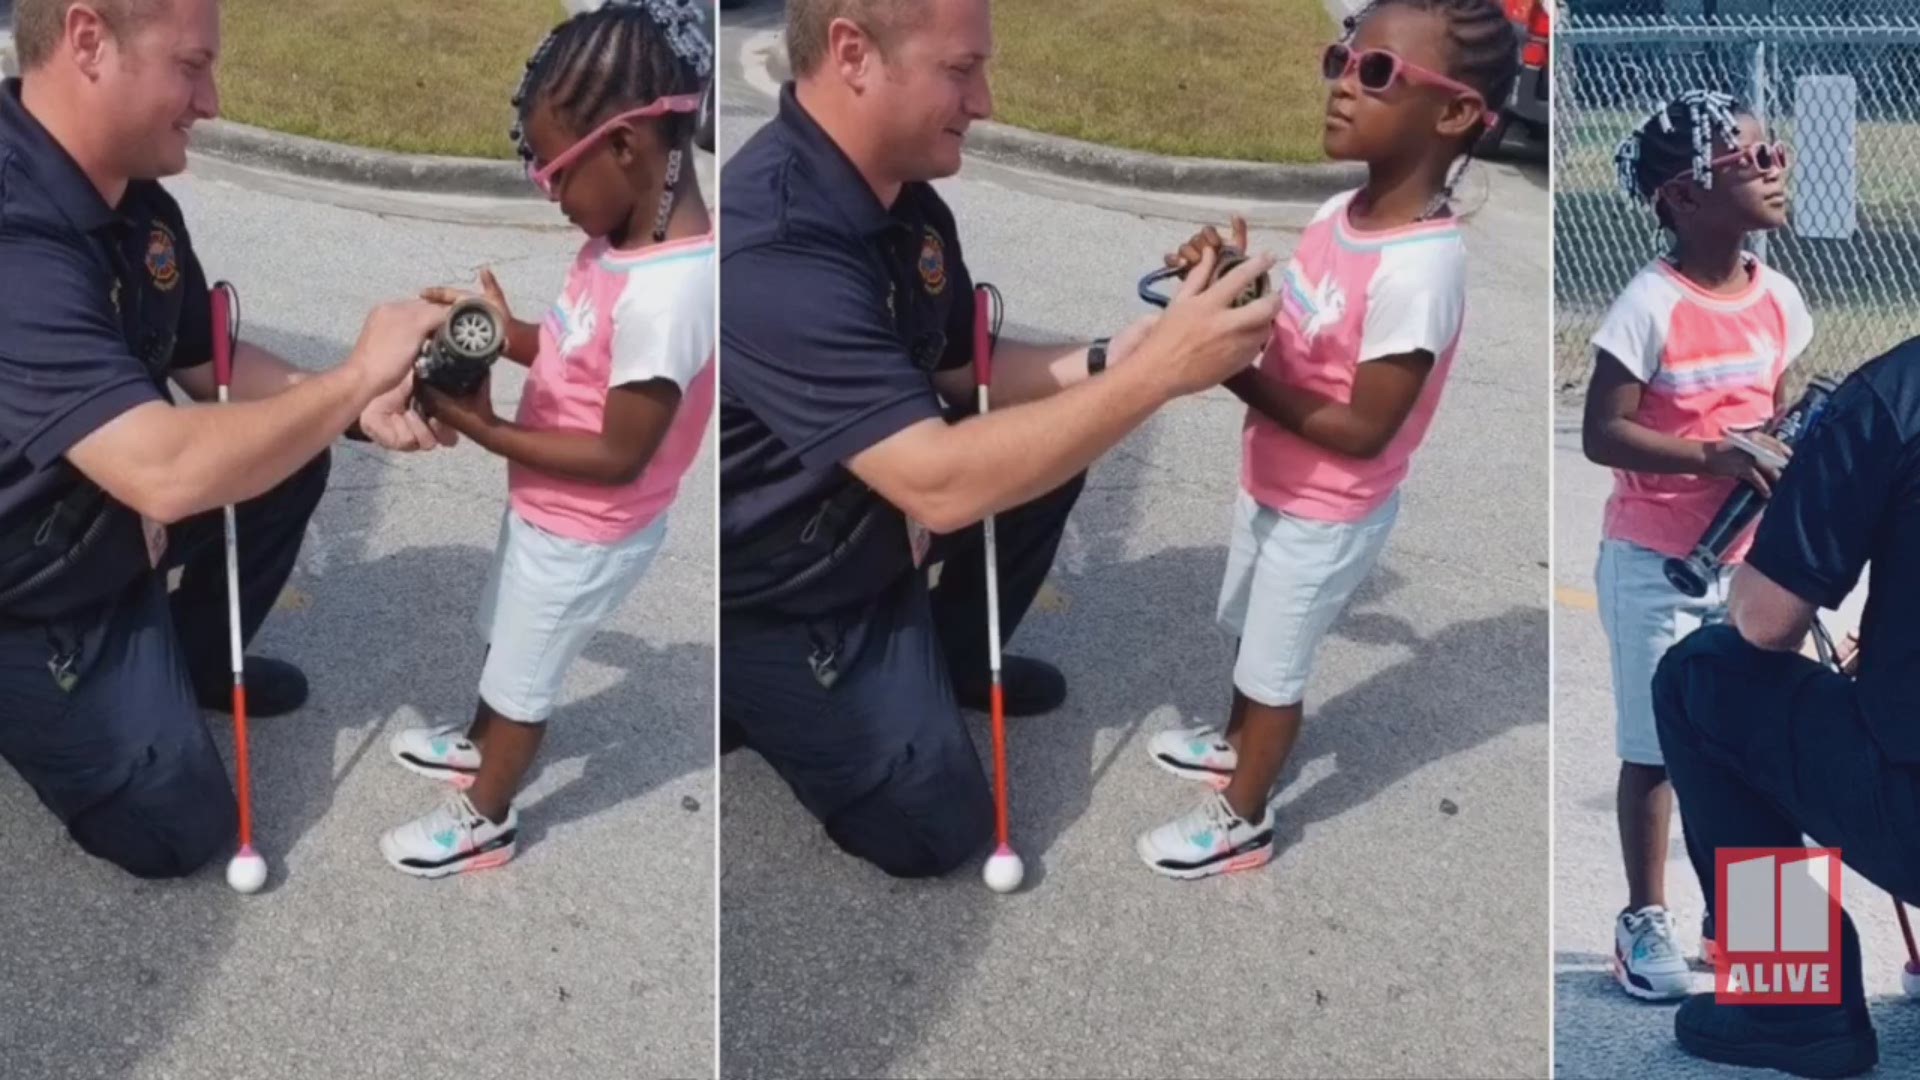 He "took it upon himself" to make the child, who is visually impaired, feel special.